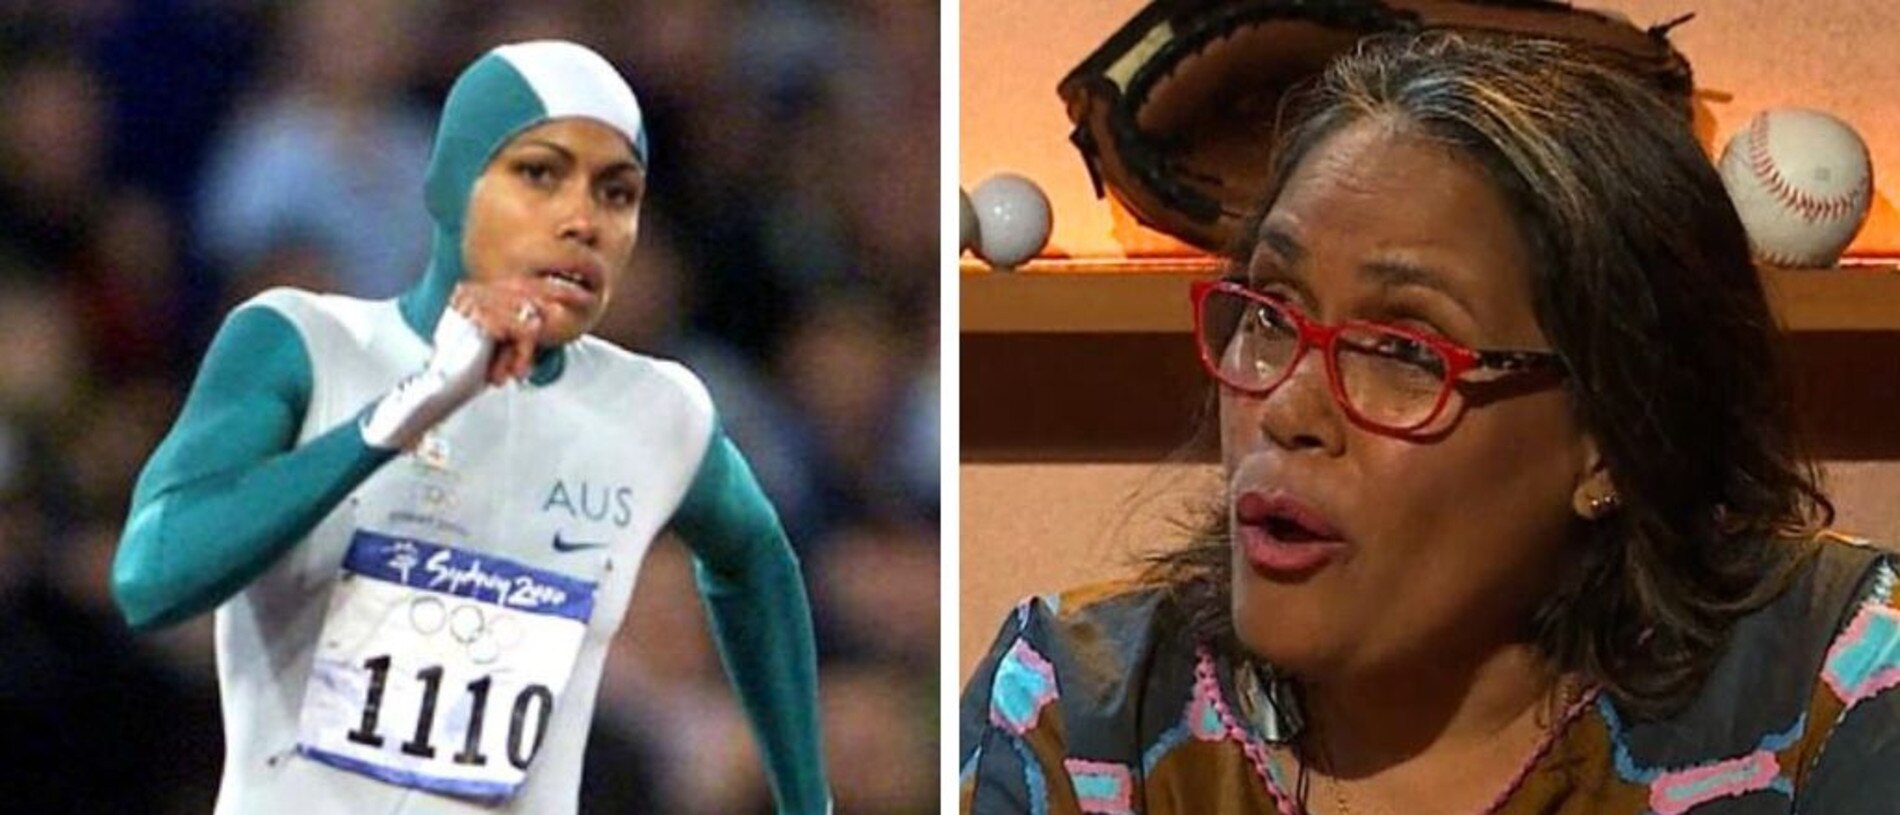 Cathy Freeman has commentated her iconic 400m gold medal win. Pic: Seven/Getty